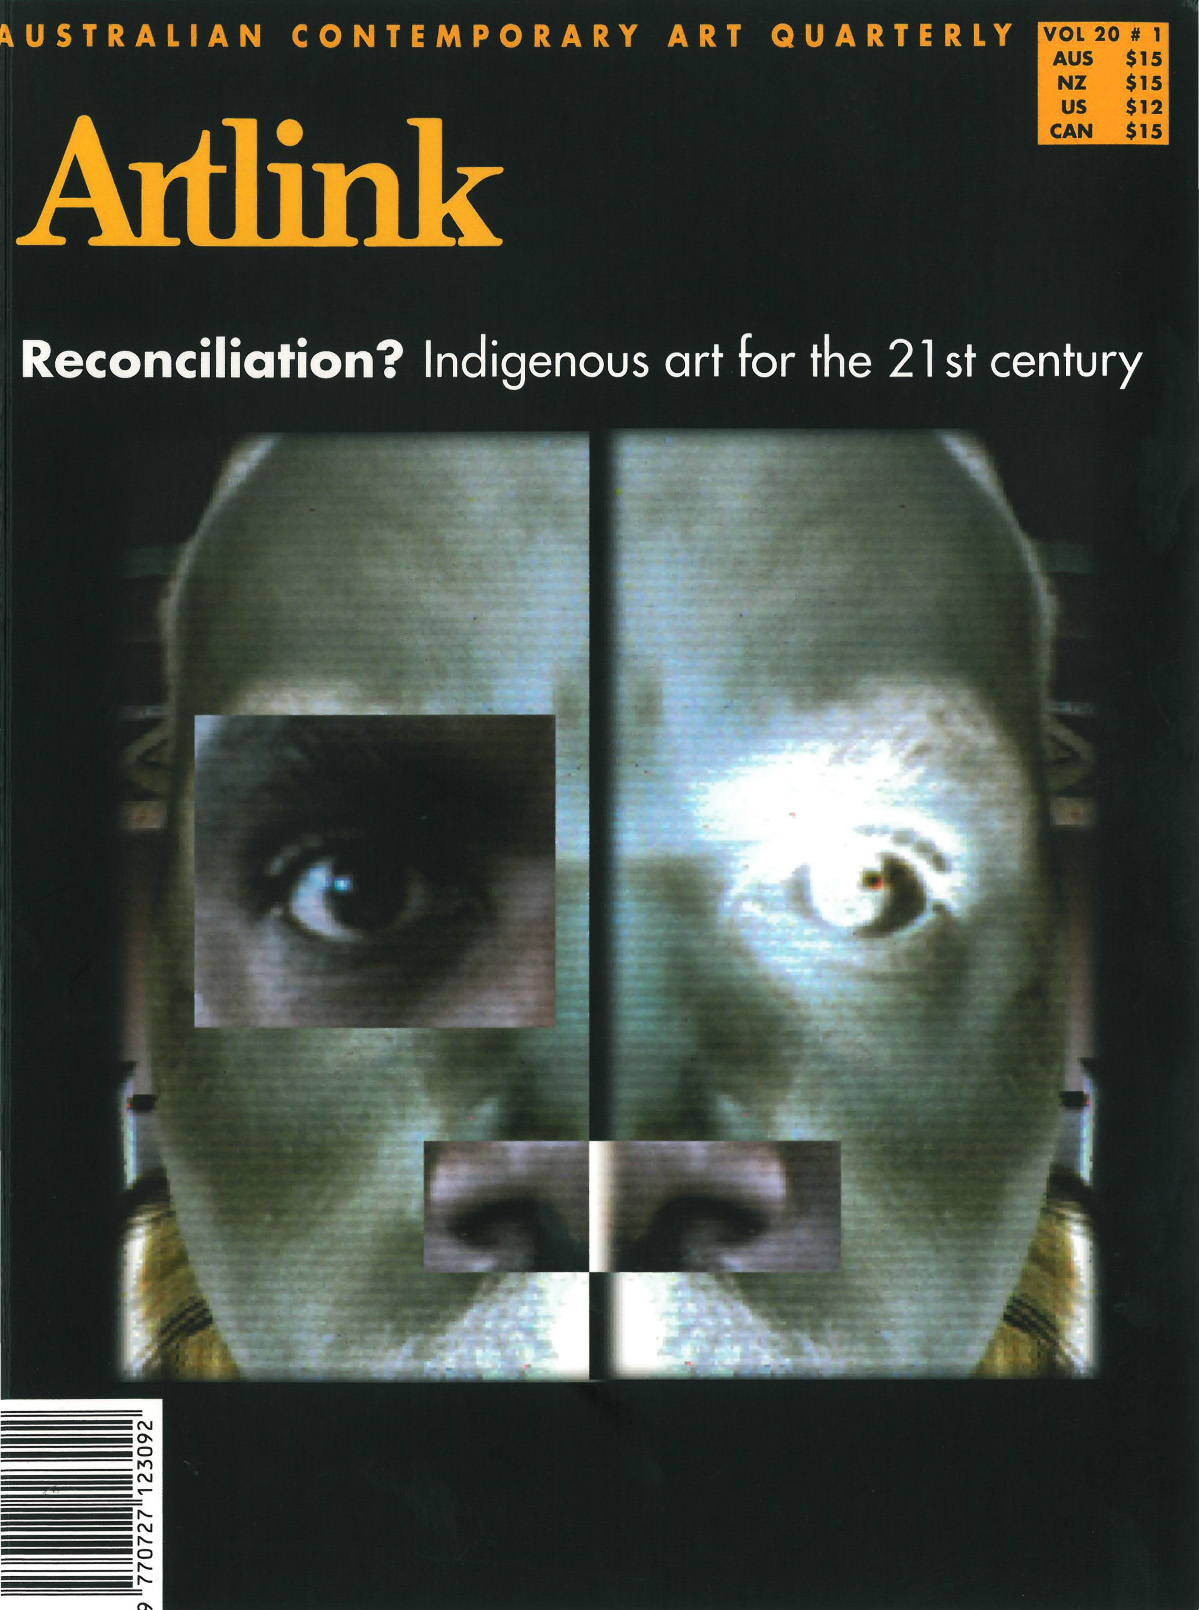 Issue 20:1 | March 2000 | Reconciliation: Indigenous art for the 21st Century